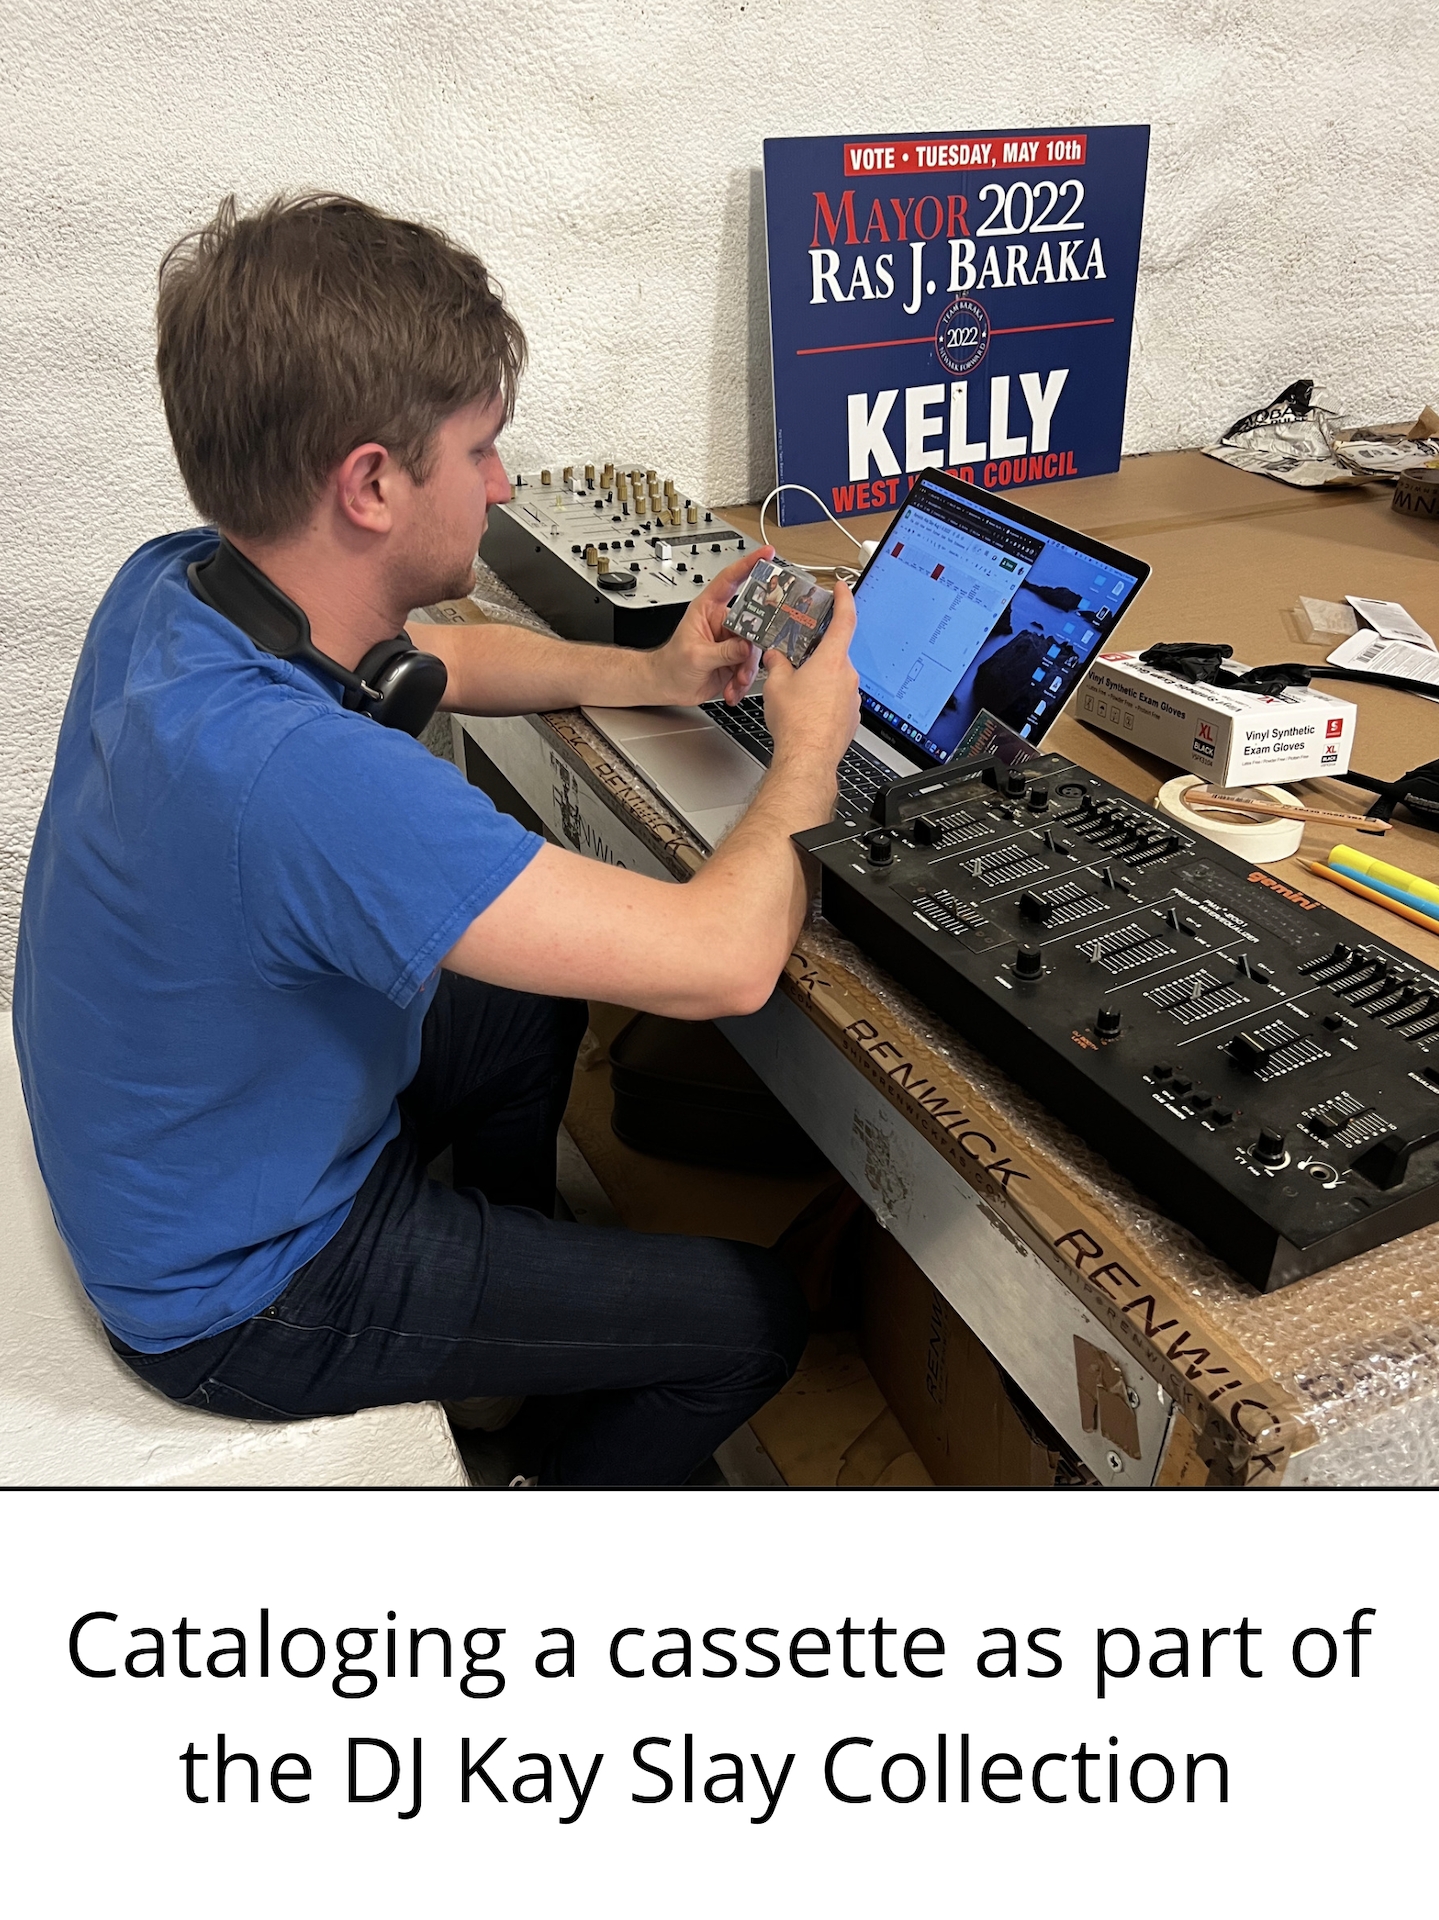 a figure types at a laptop. Text below image reads "cataloging a cassette as part of the DJ Kay Slay collection."